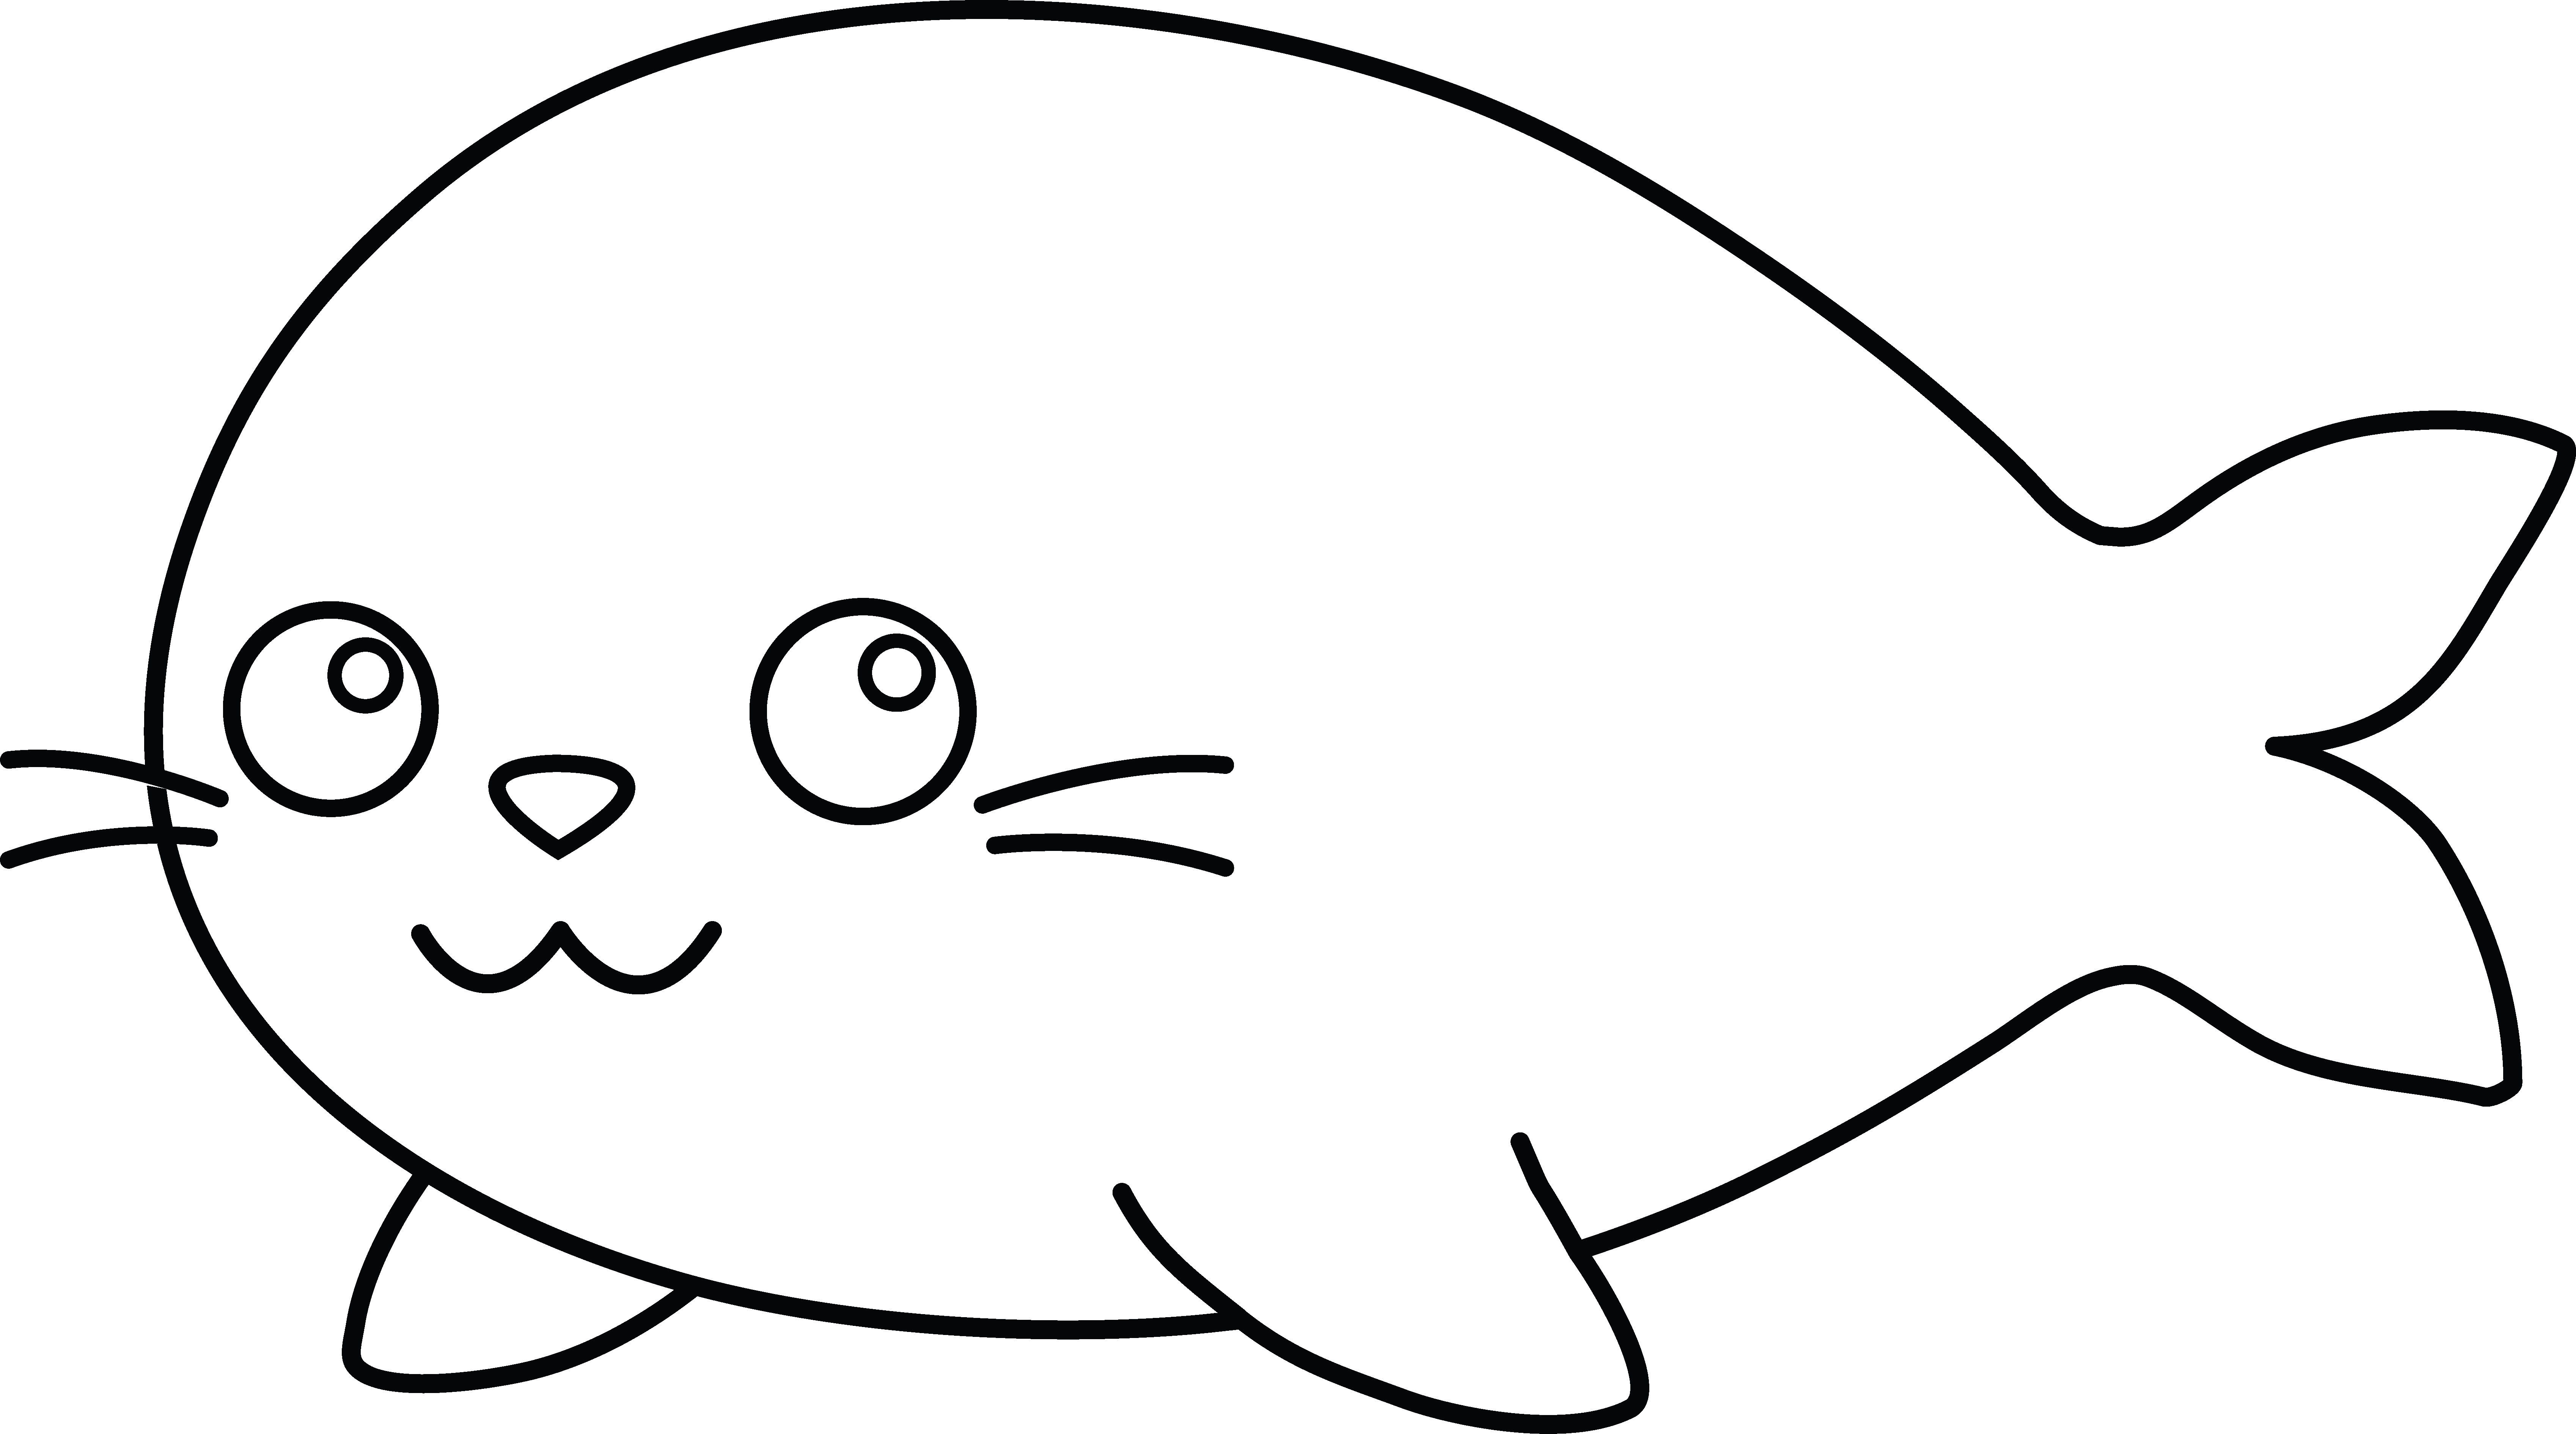 seal clipart black and white